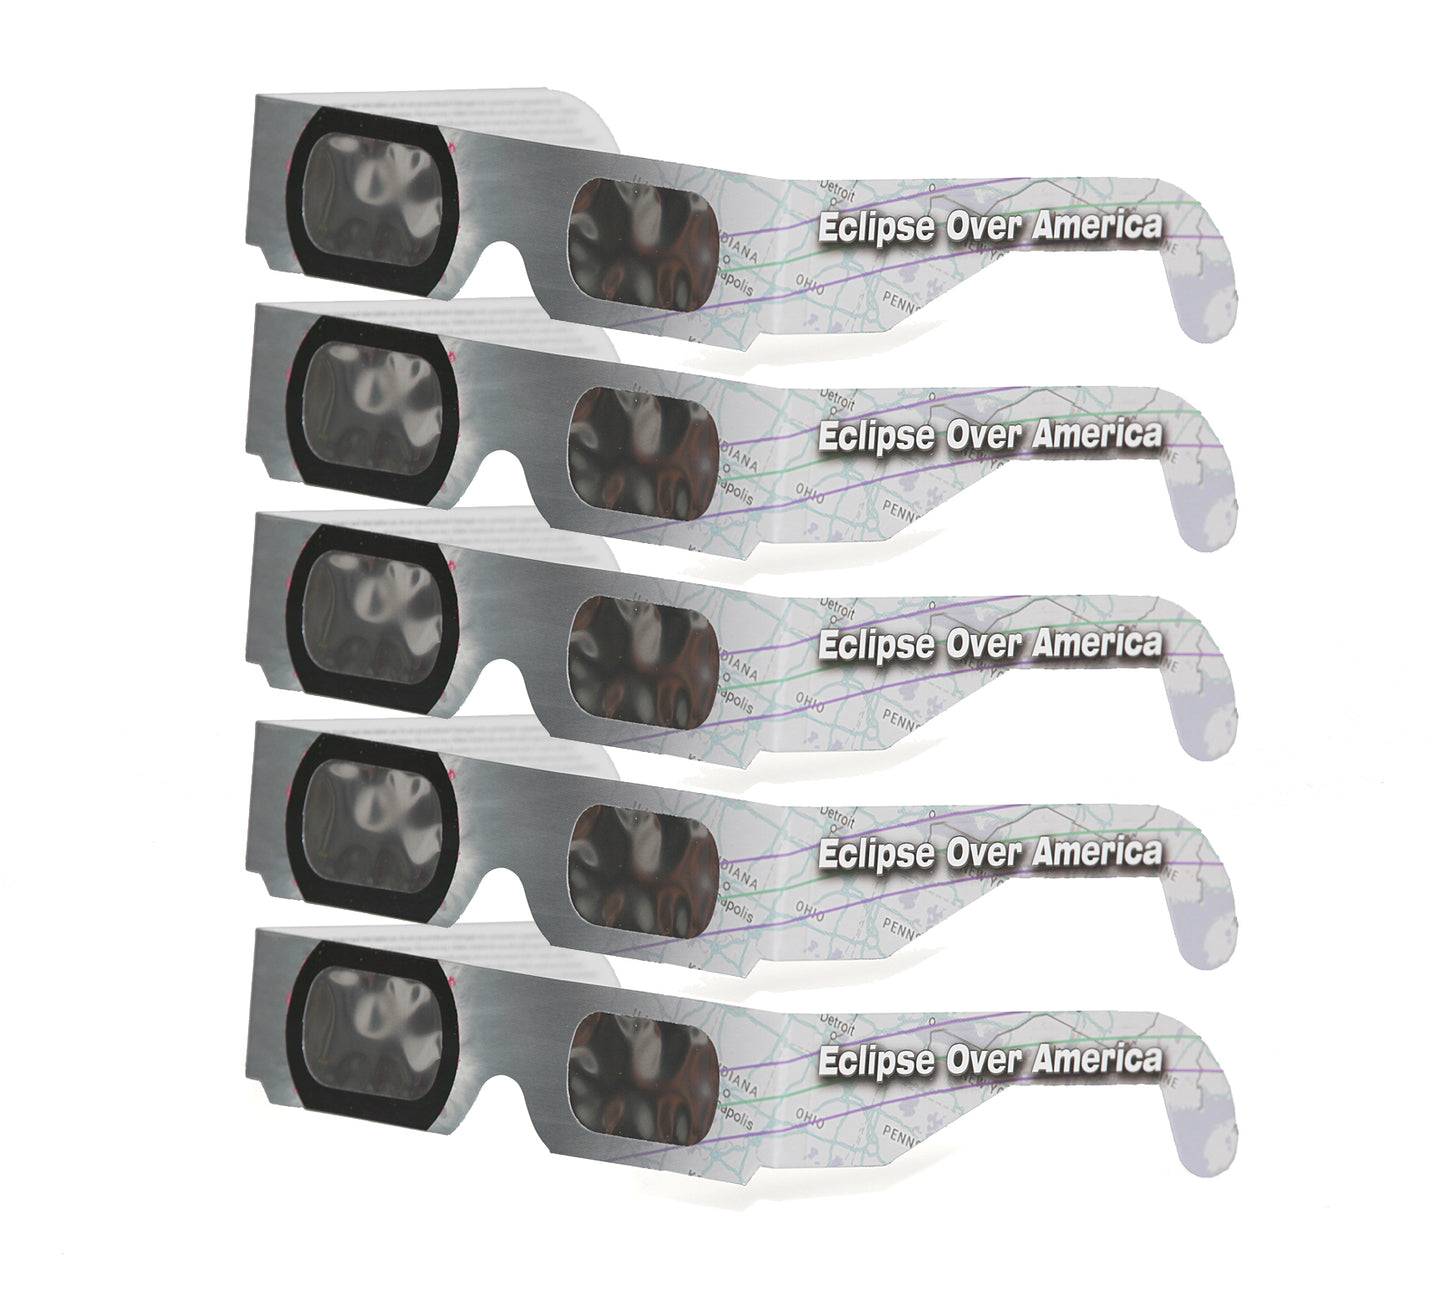 ECLIPSE OVER AMERICA style Eclipse Solar Glasses - 5 pack